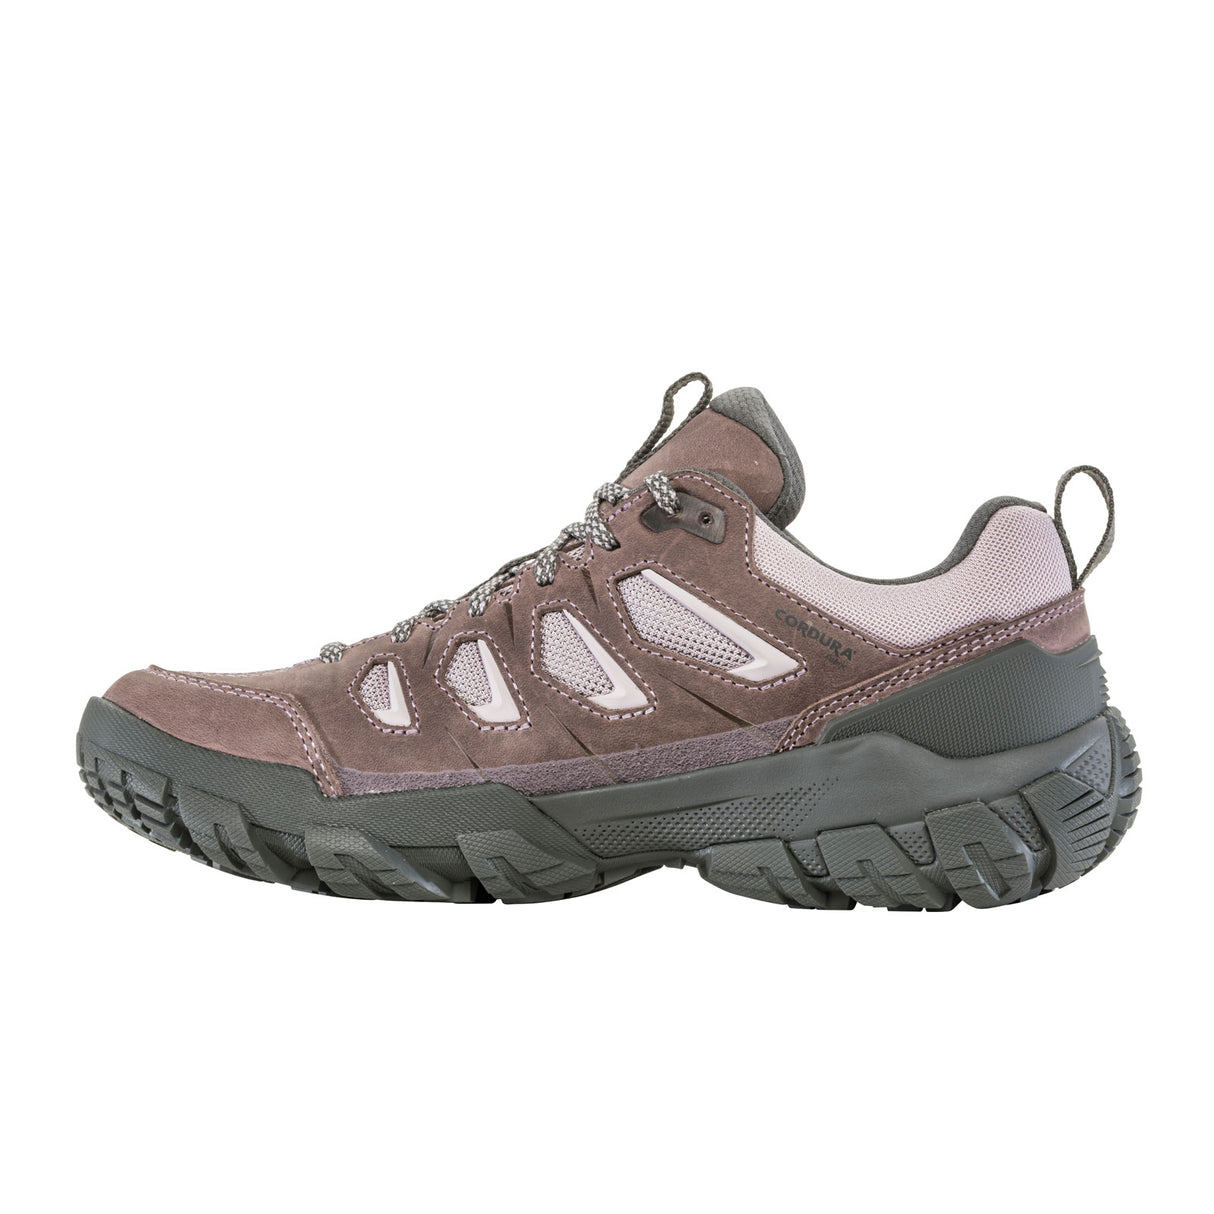 Oboz Sawtooth X Low B-DRY Hiking Shoe (Women) - Lupine Boots - Hiking - Low - The Heel Shoe Fitters